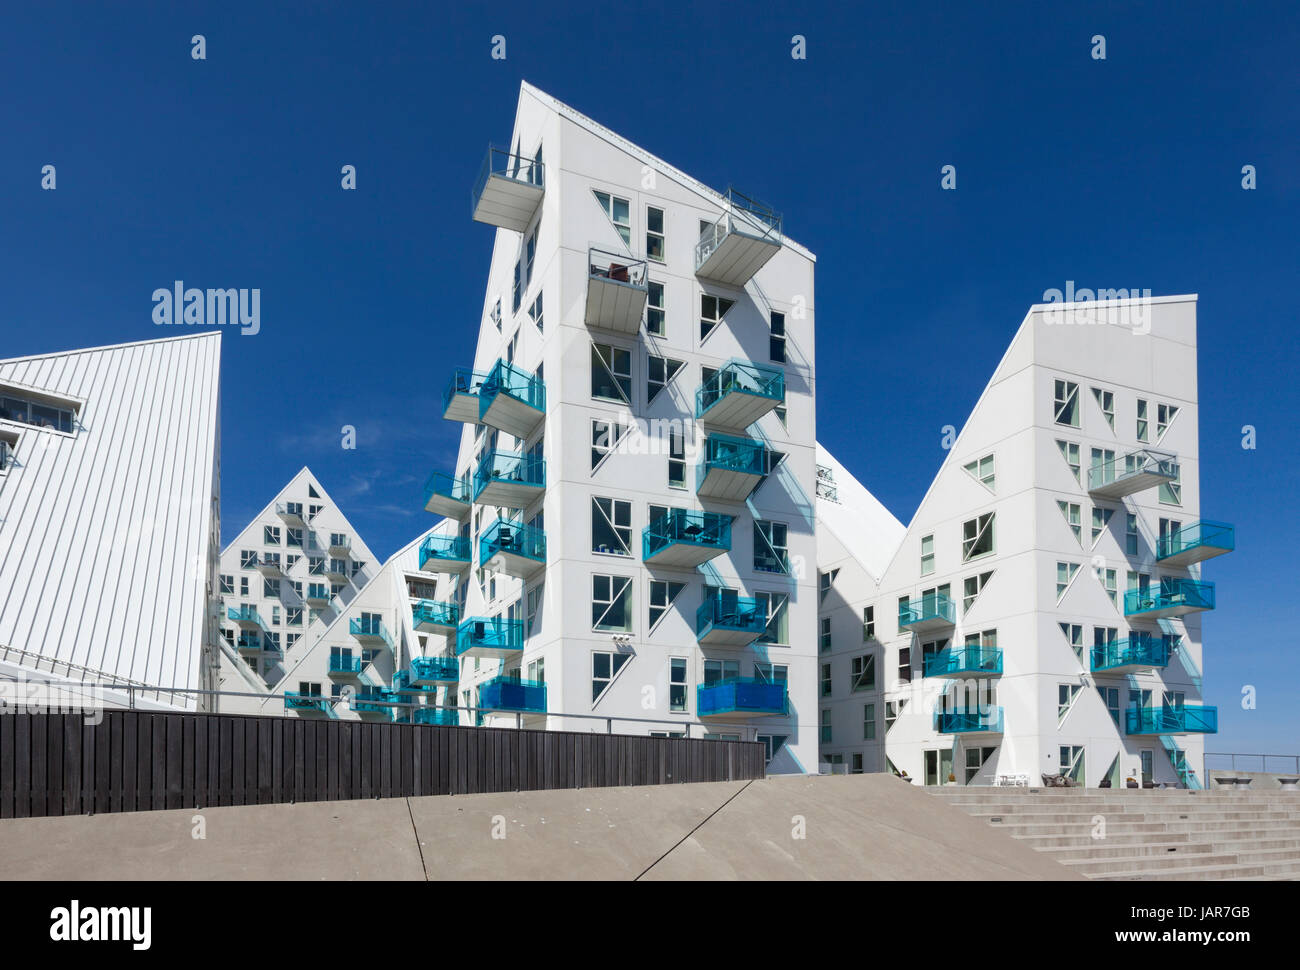 Aarhus, Denmark - May 2, 2017: Contemporary residential architecture at newly developed harbor area. The complex is called 'Isbjerget', which is Danis Stock Photo